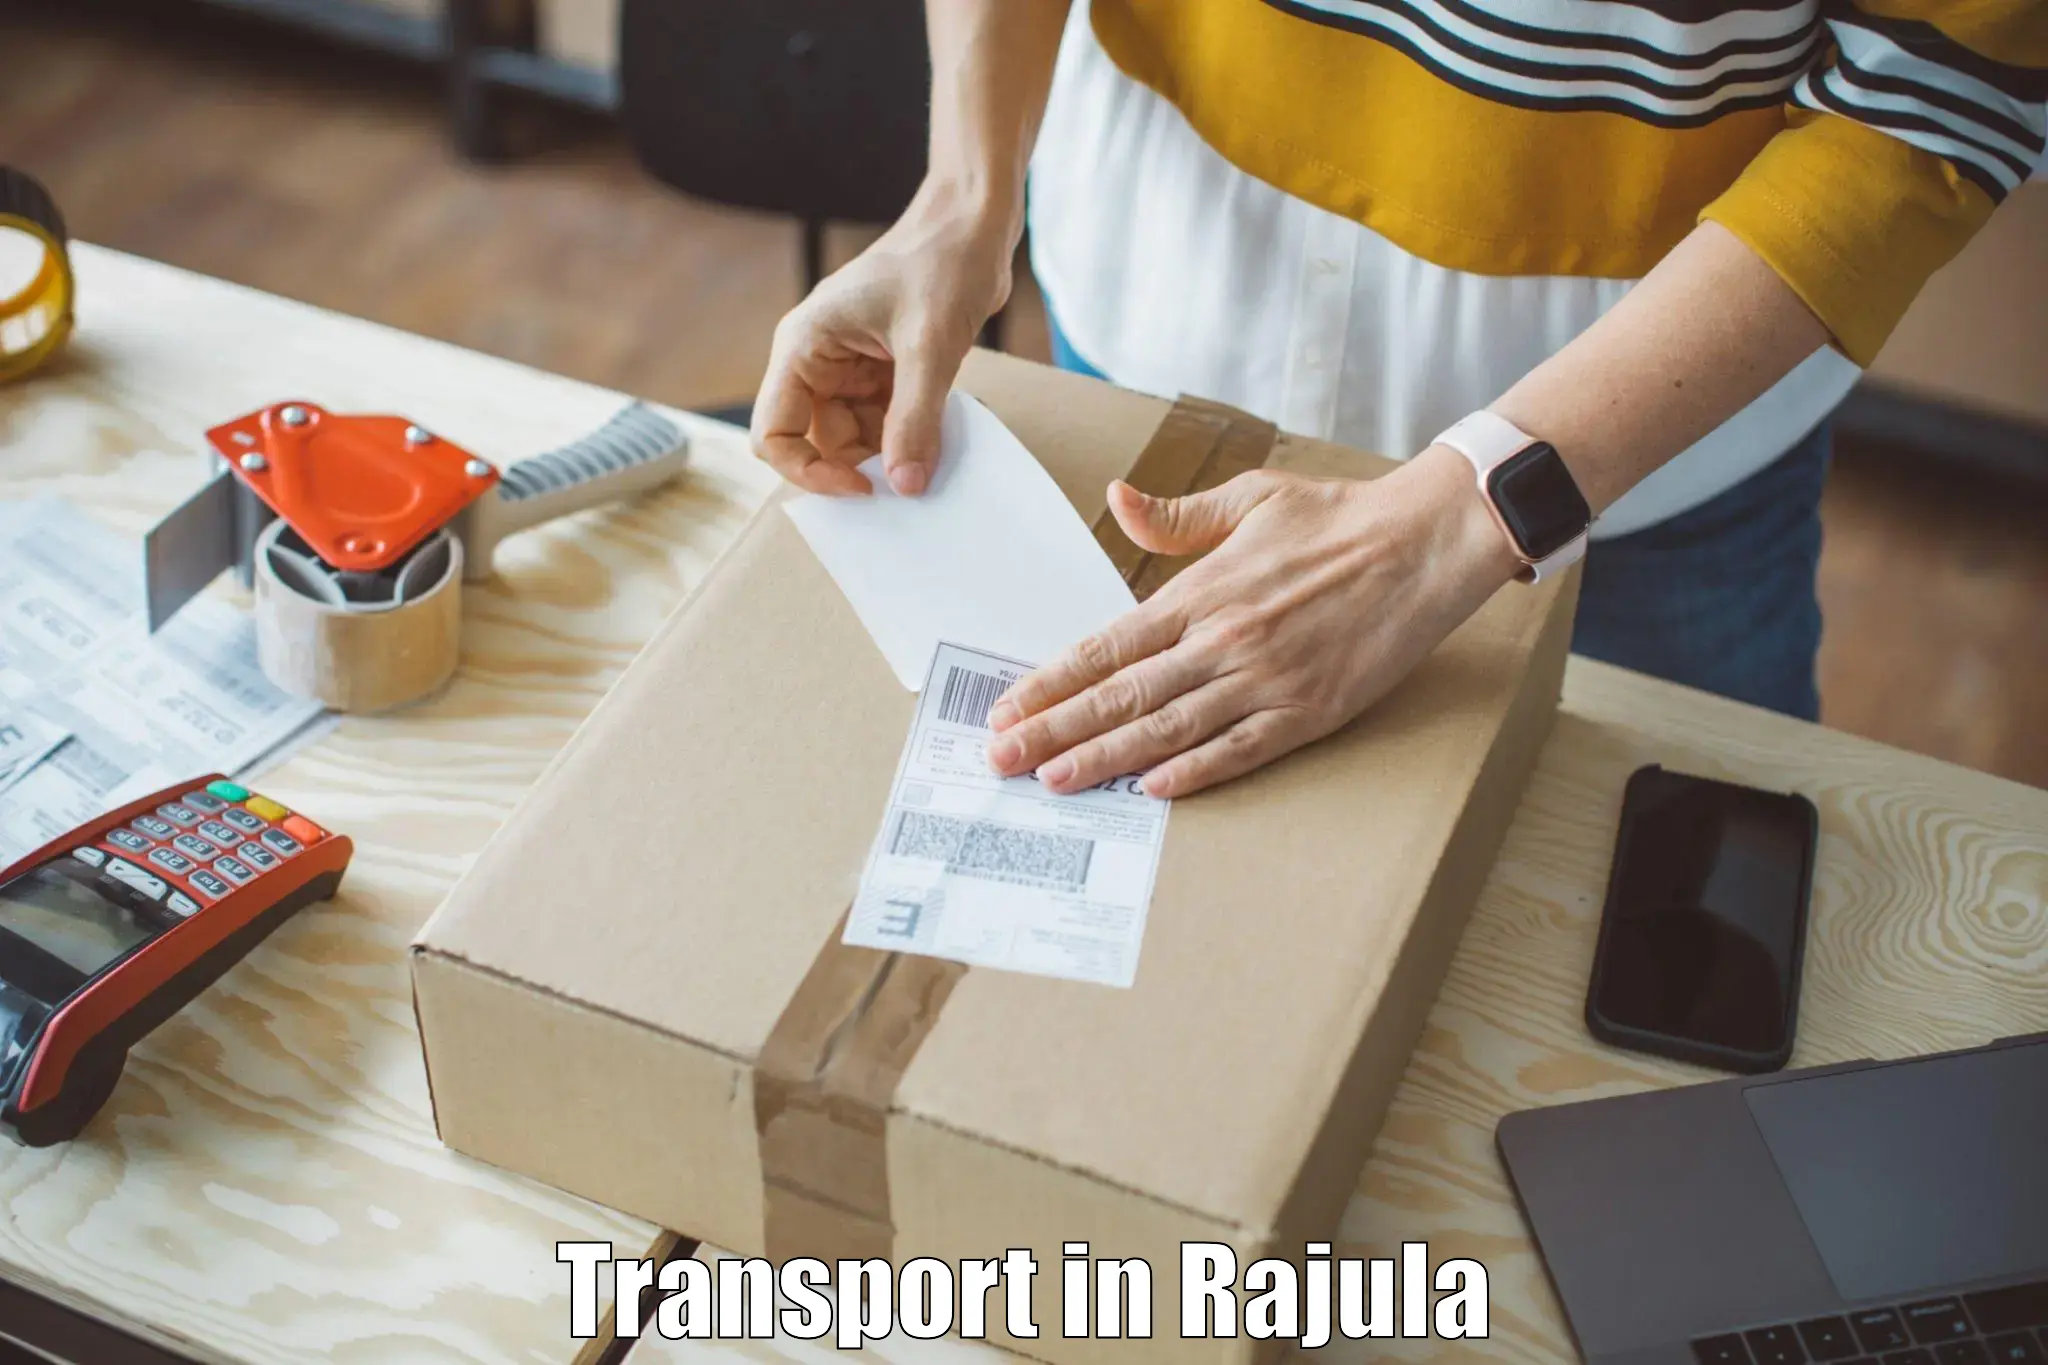 Daily parcel service transport in Rajula